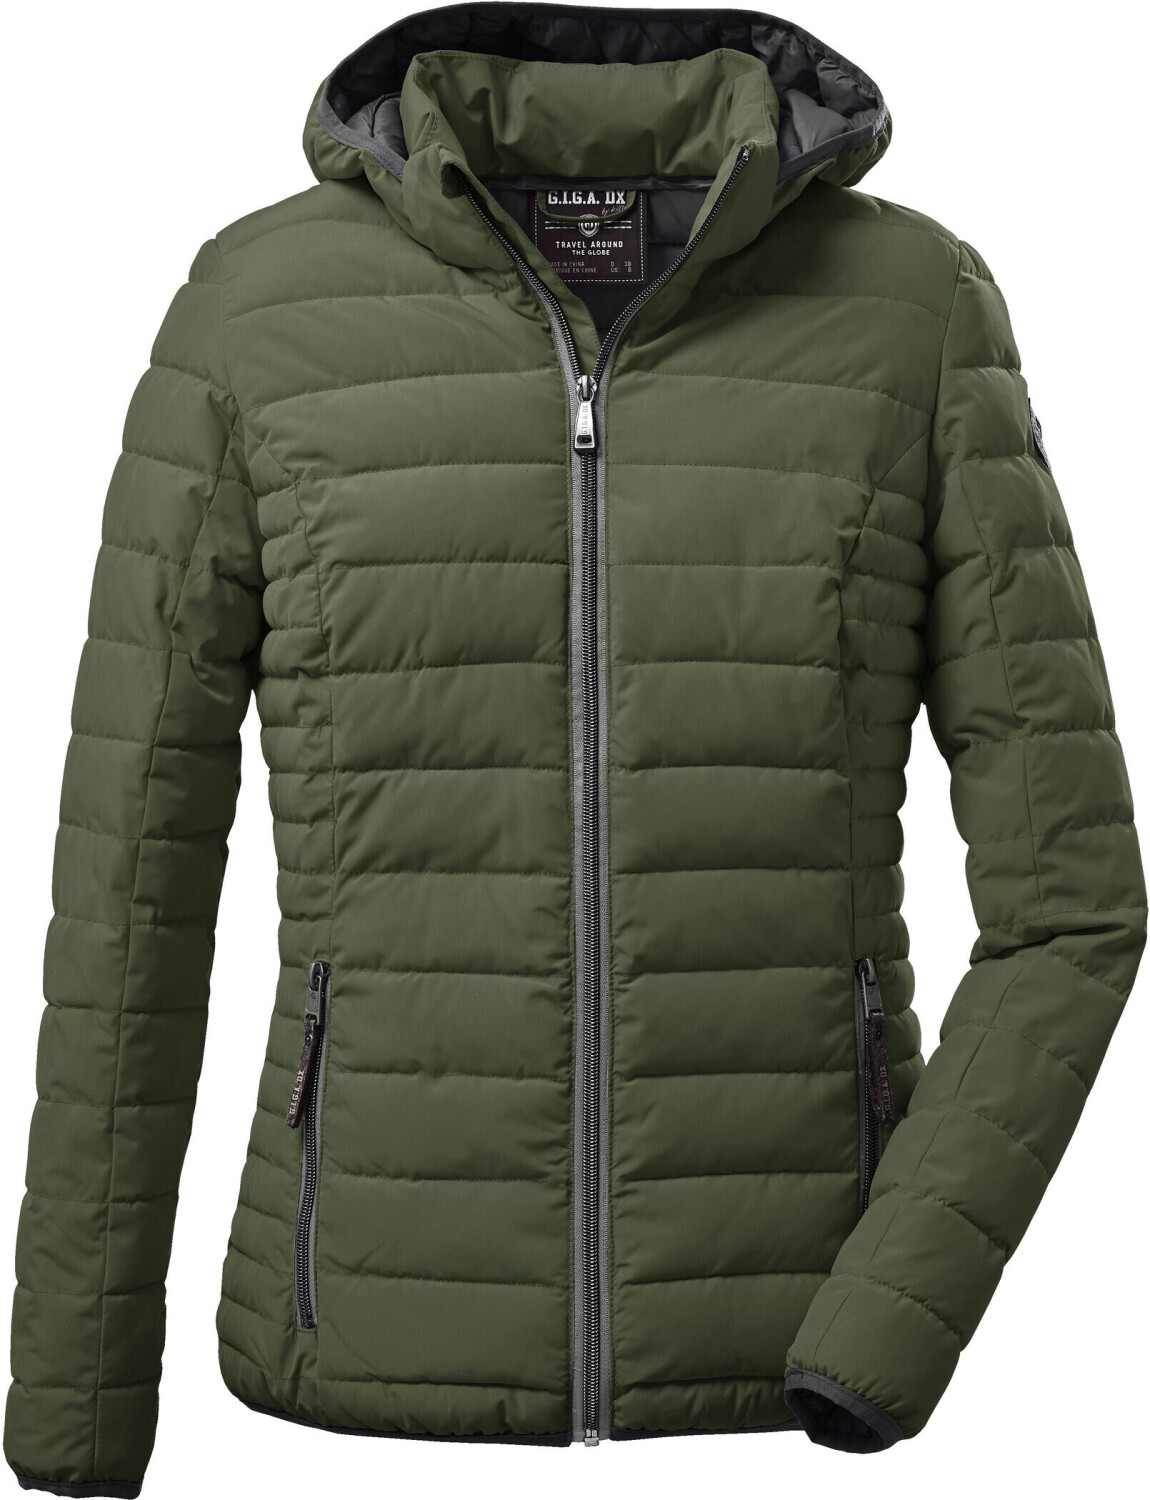 on (Today) Buy £43.52 D Quilted Best Wmn Killtec Jacket Ventoso from Deals –